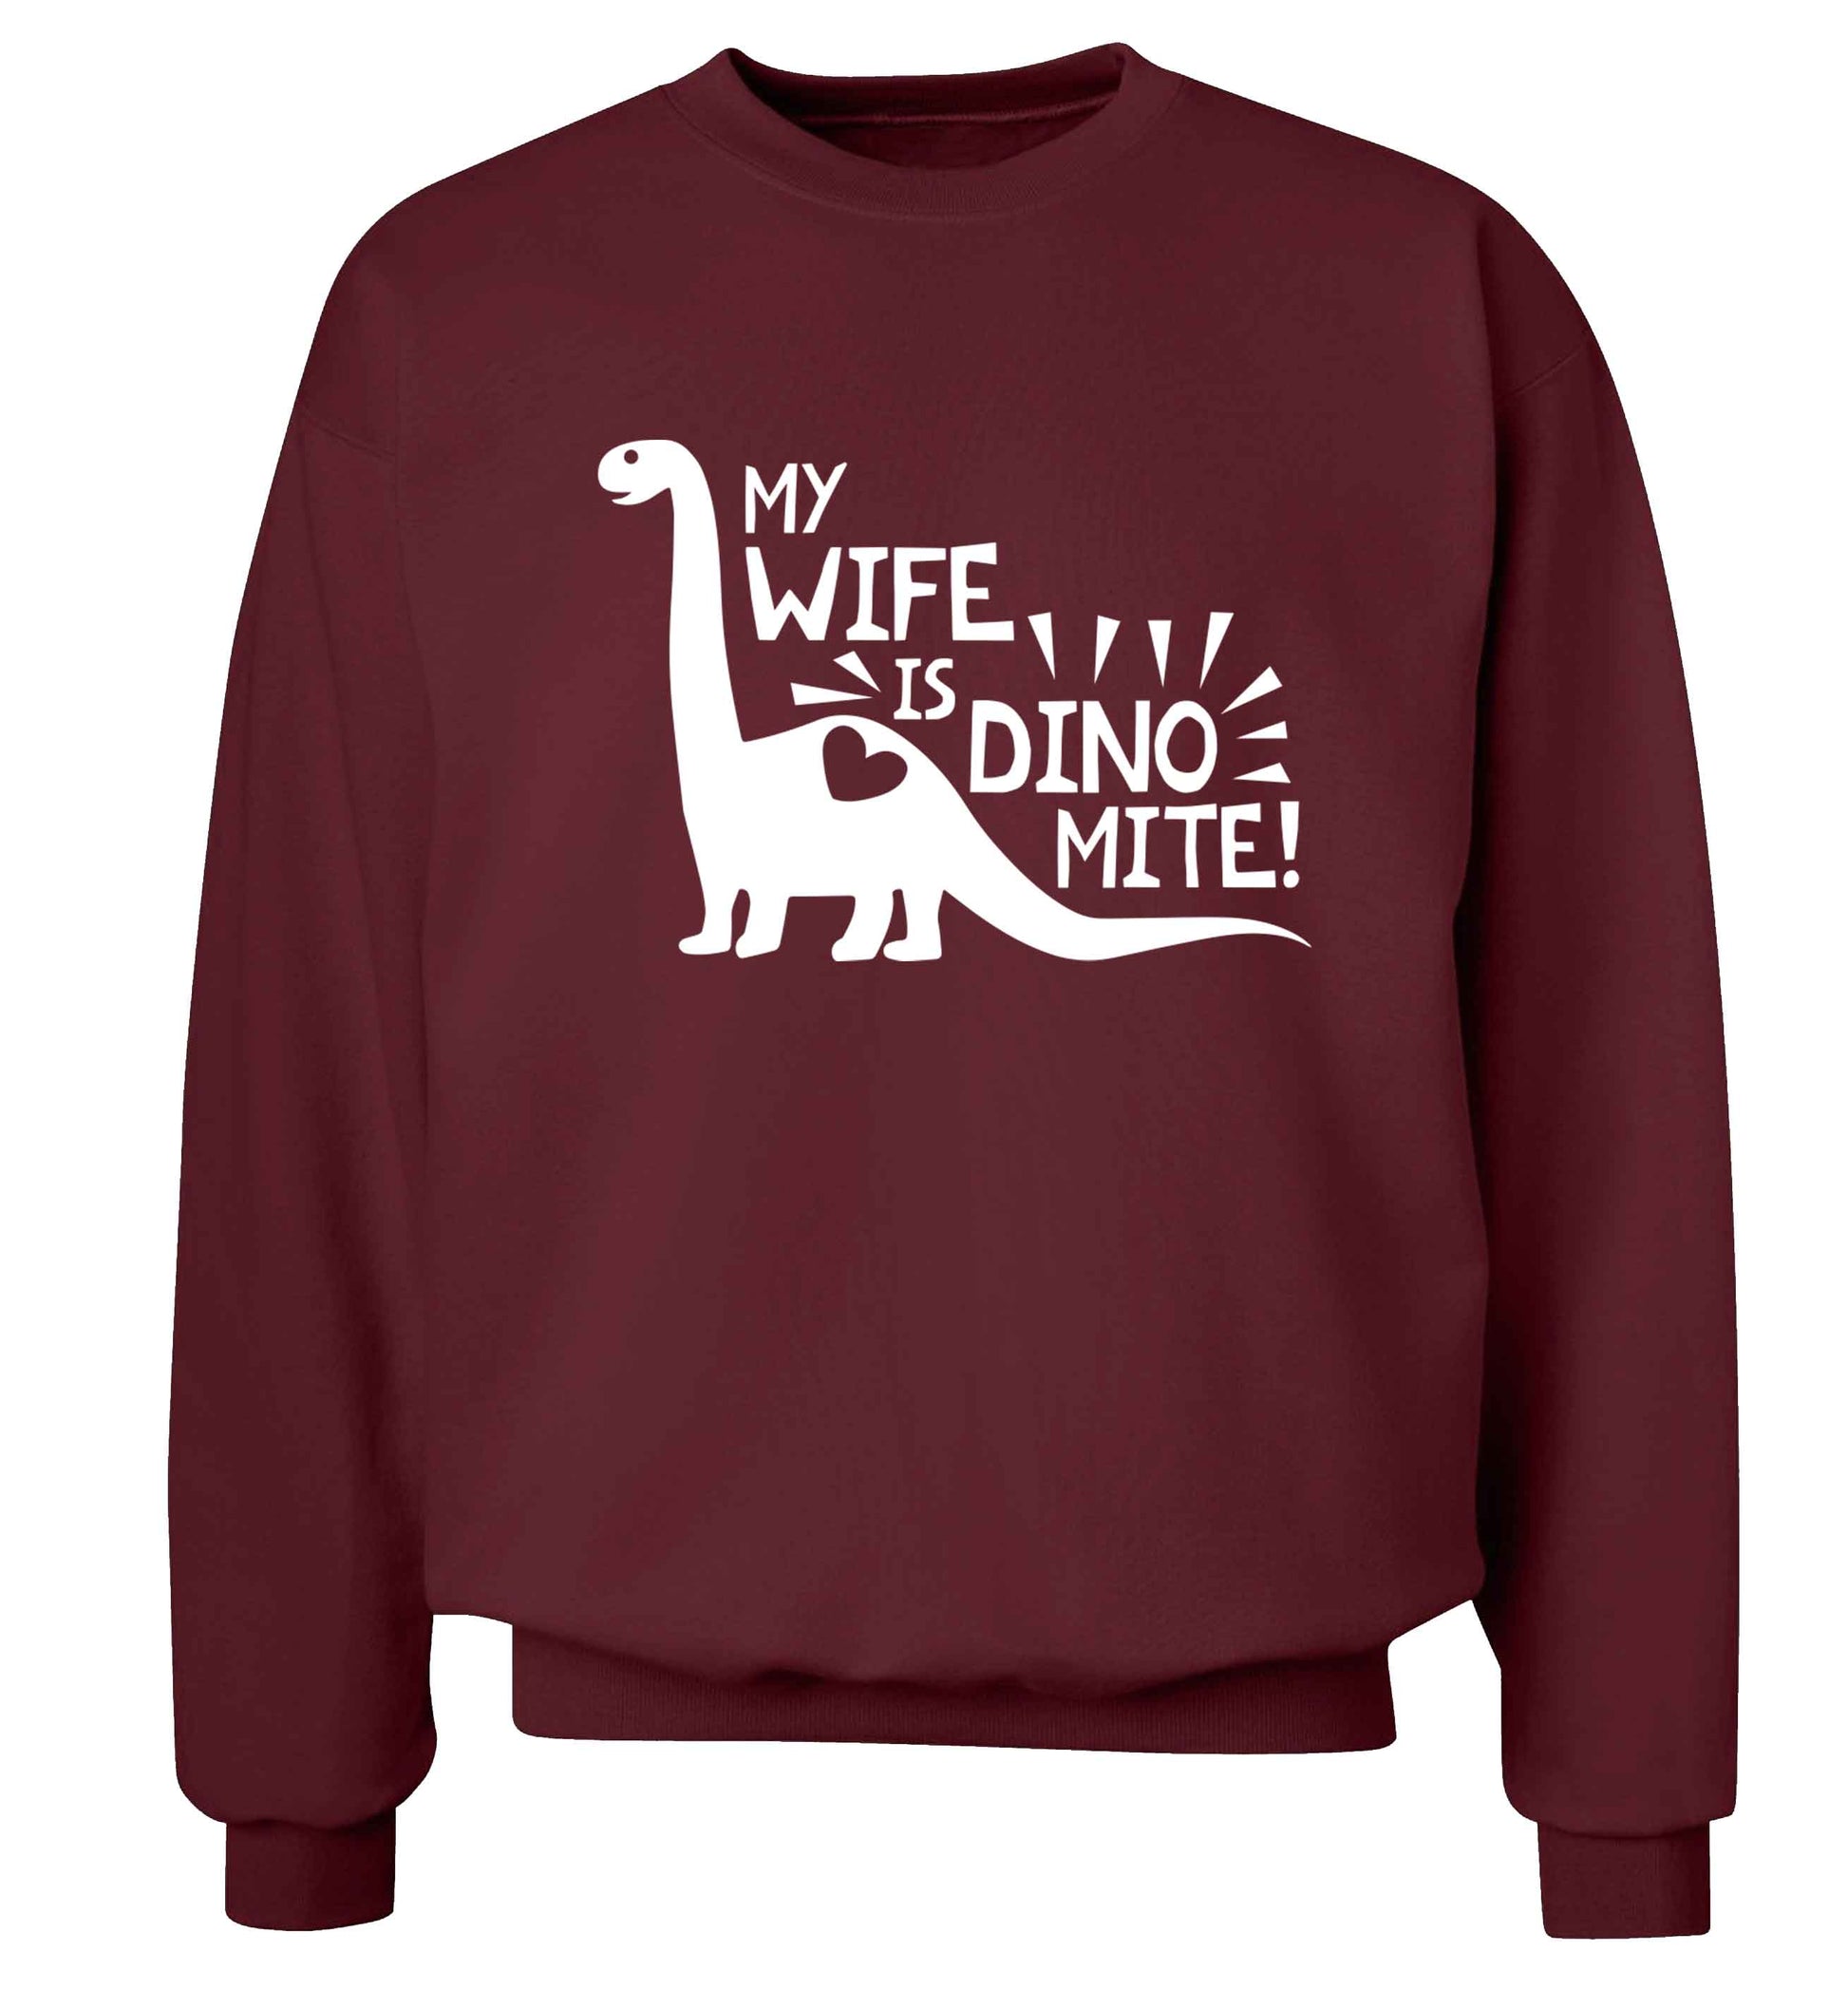 My wife is dinomite! Adult's unisex maroon Sweater 2XL